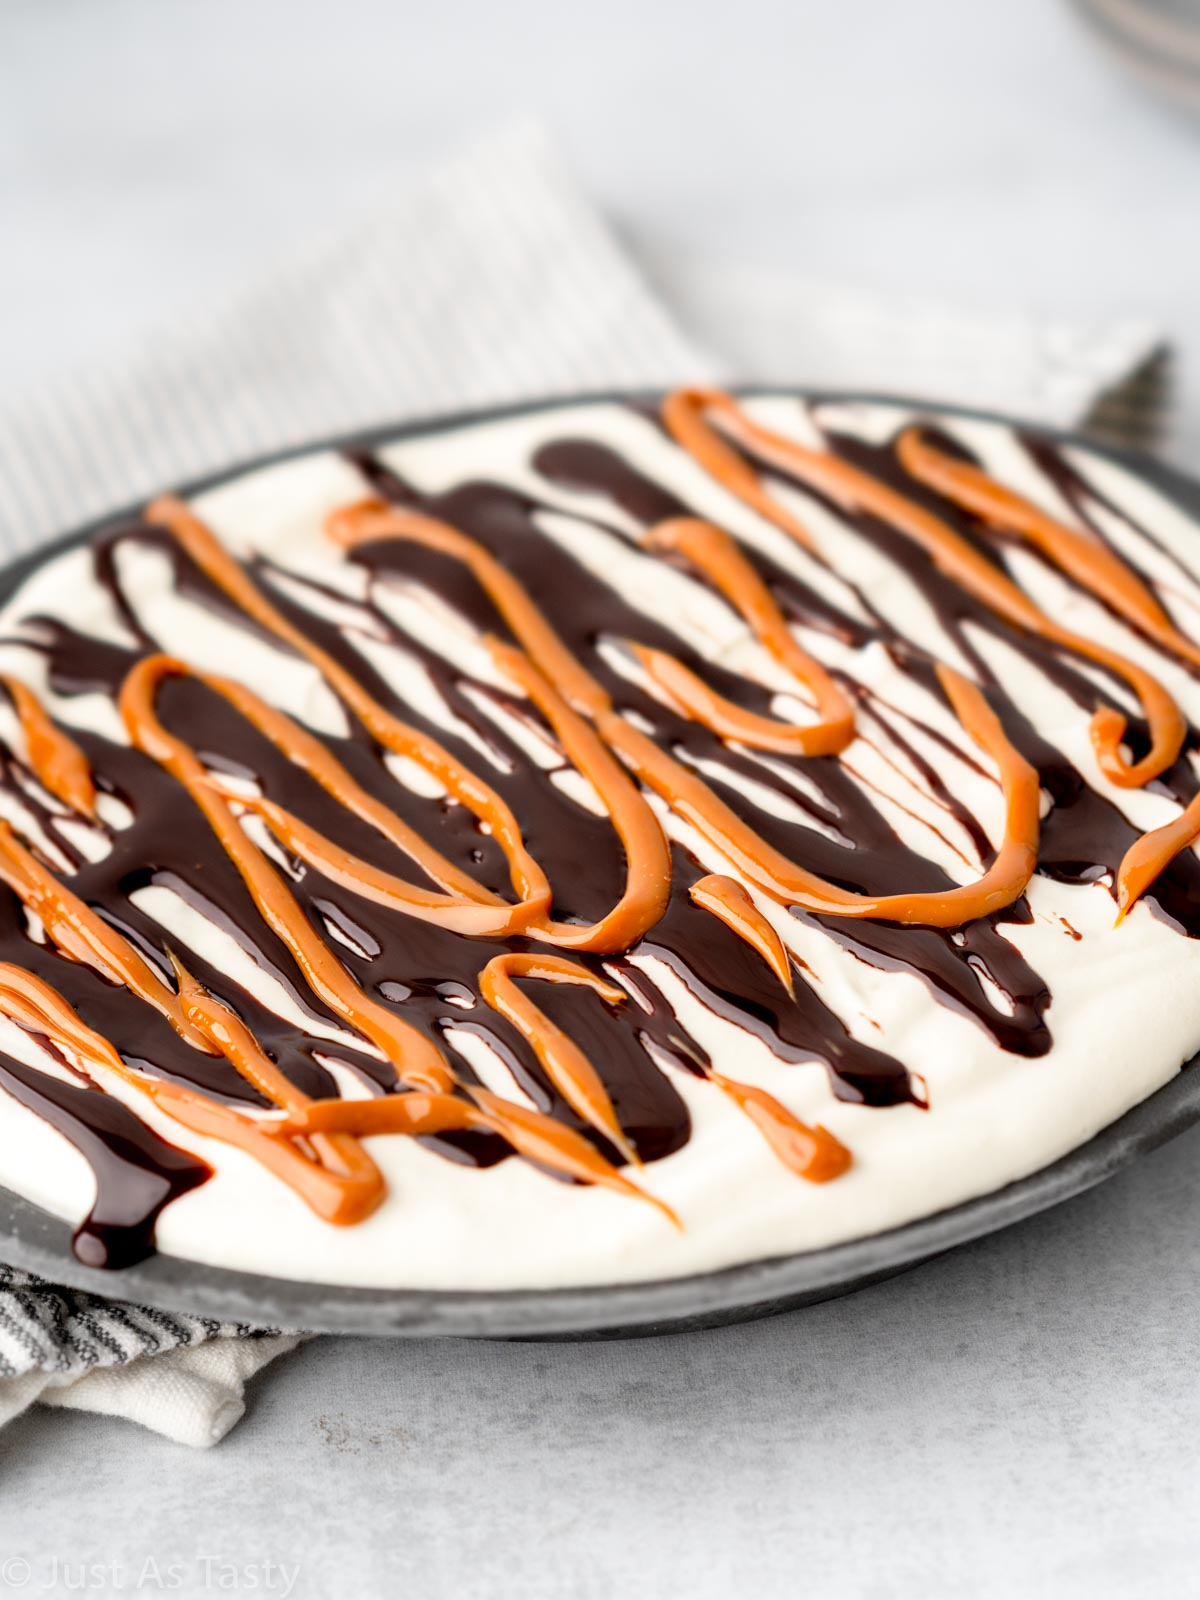 Banoffee ice cream pie topped with chocolate sauce and dulce de leche.